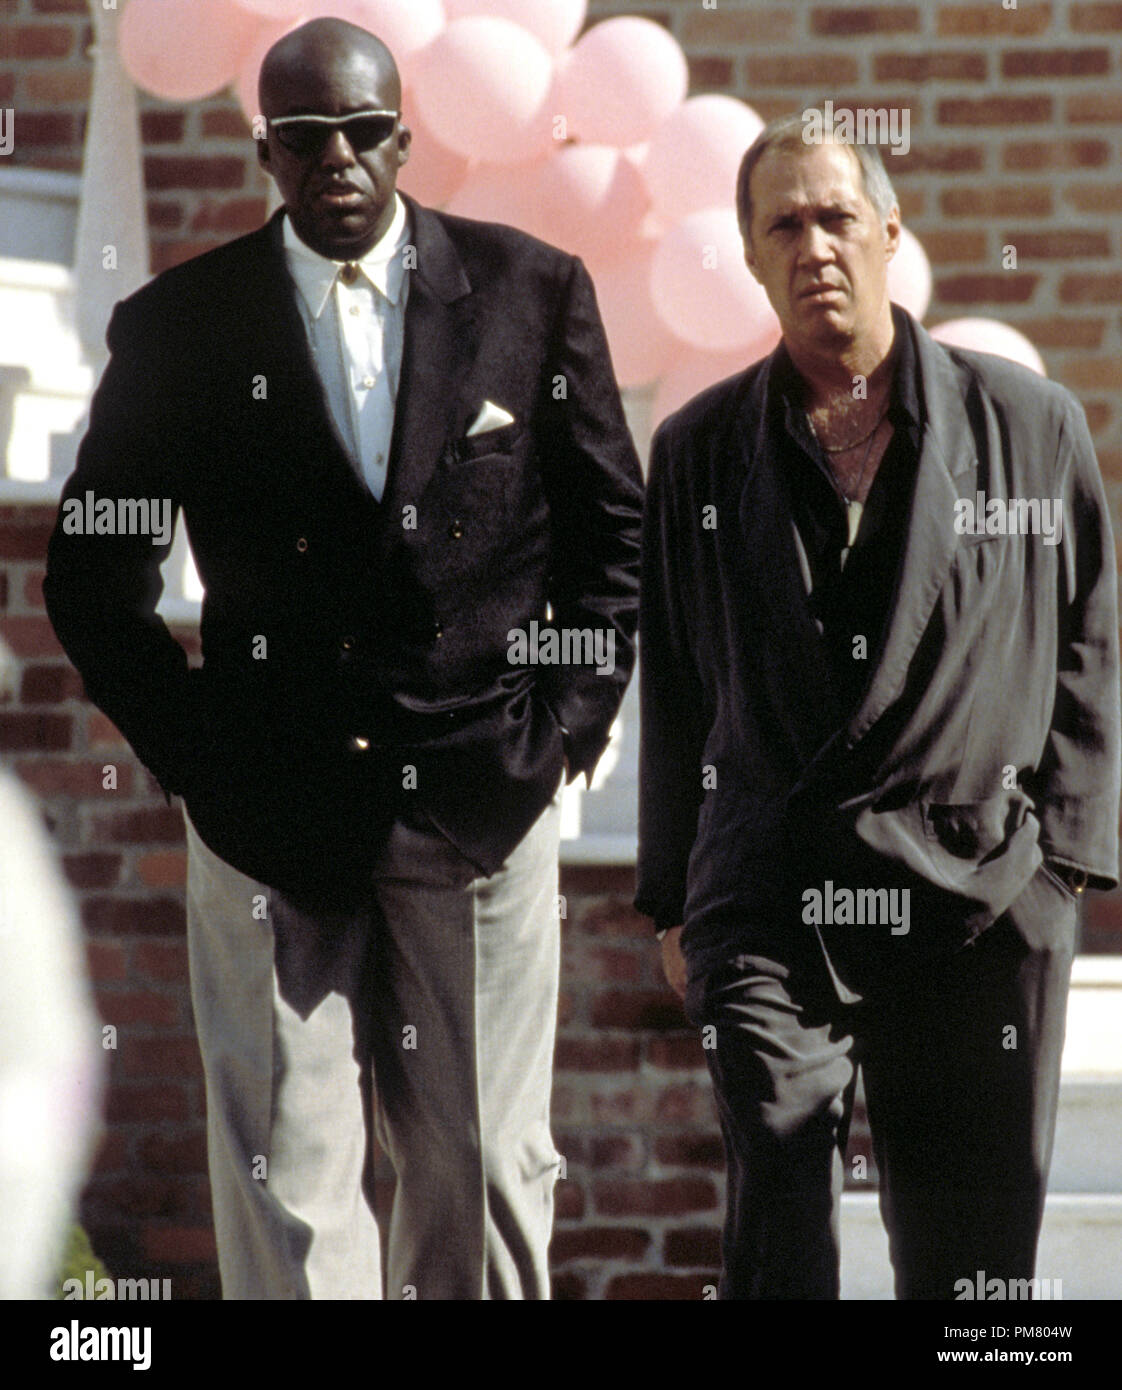 Film still or Publicity still from 'Bird on a Wire' Bill Duke and David Carradine © 1990 Universal Pictures Photo Credit: Joseph Lederer   All Rights Reserved   File Reference # 31571300THA  For Editorial Use Only Stock Photo